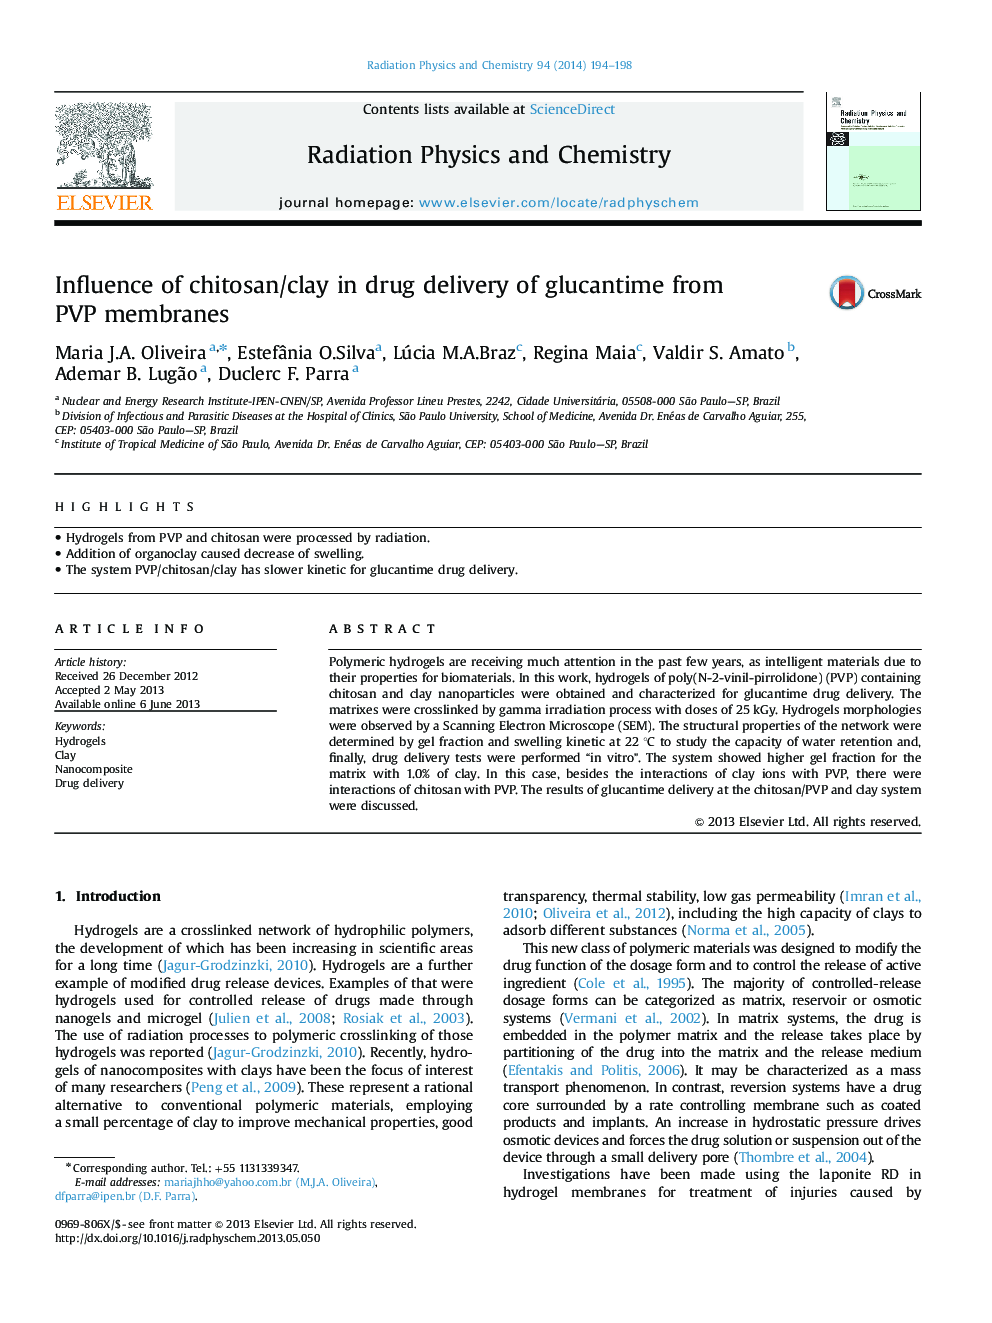 Influence of chitosan/clay in drug delivery of glucantime from PVP membranes